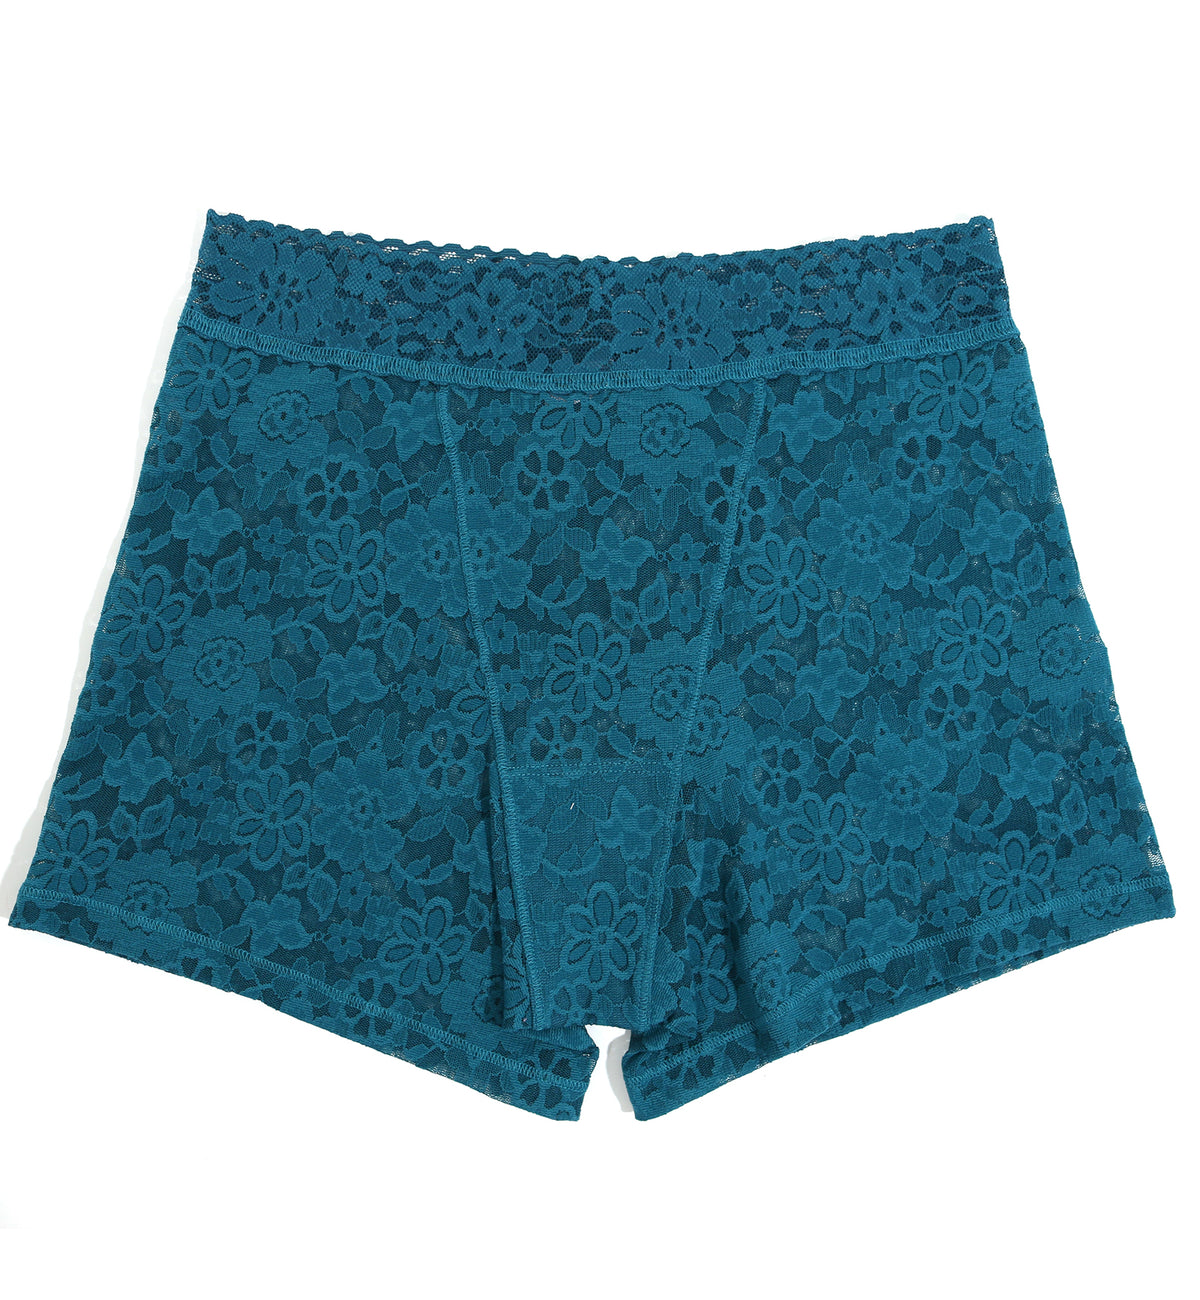 Hanky Panky Daily Lace Boxer Brief (771252P),XS,Earth Dance - Earth Dance,XS